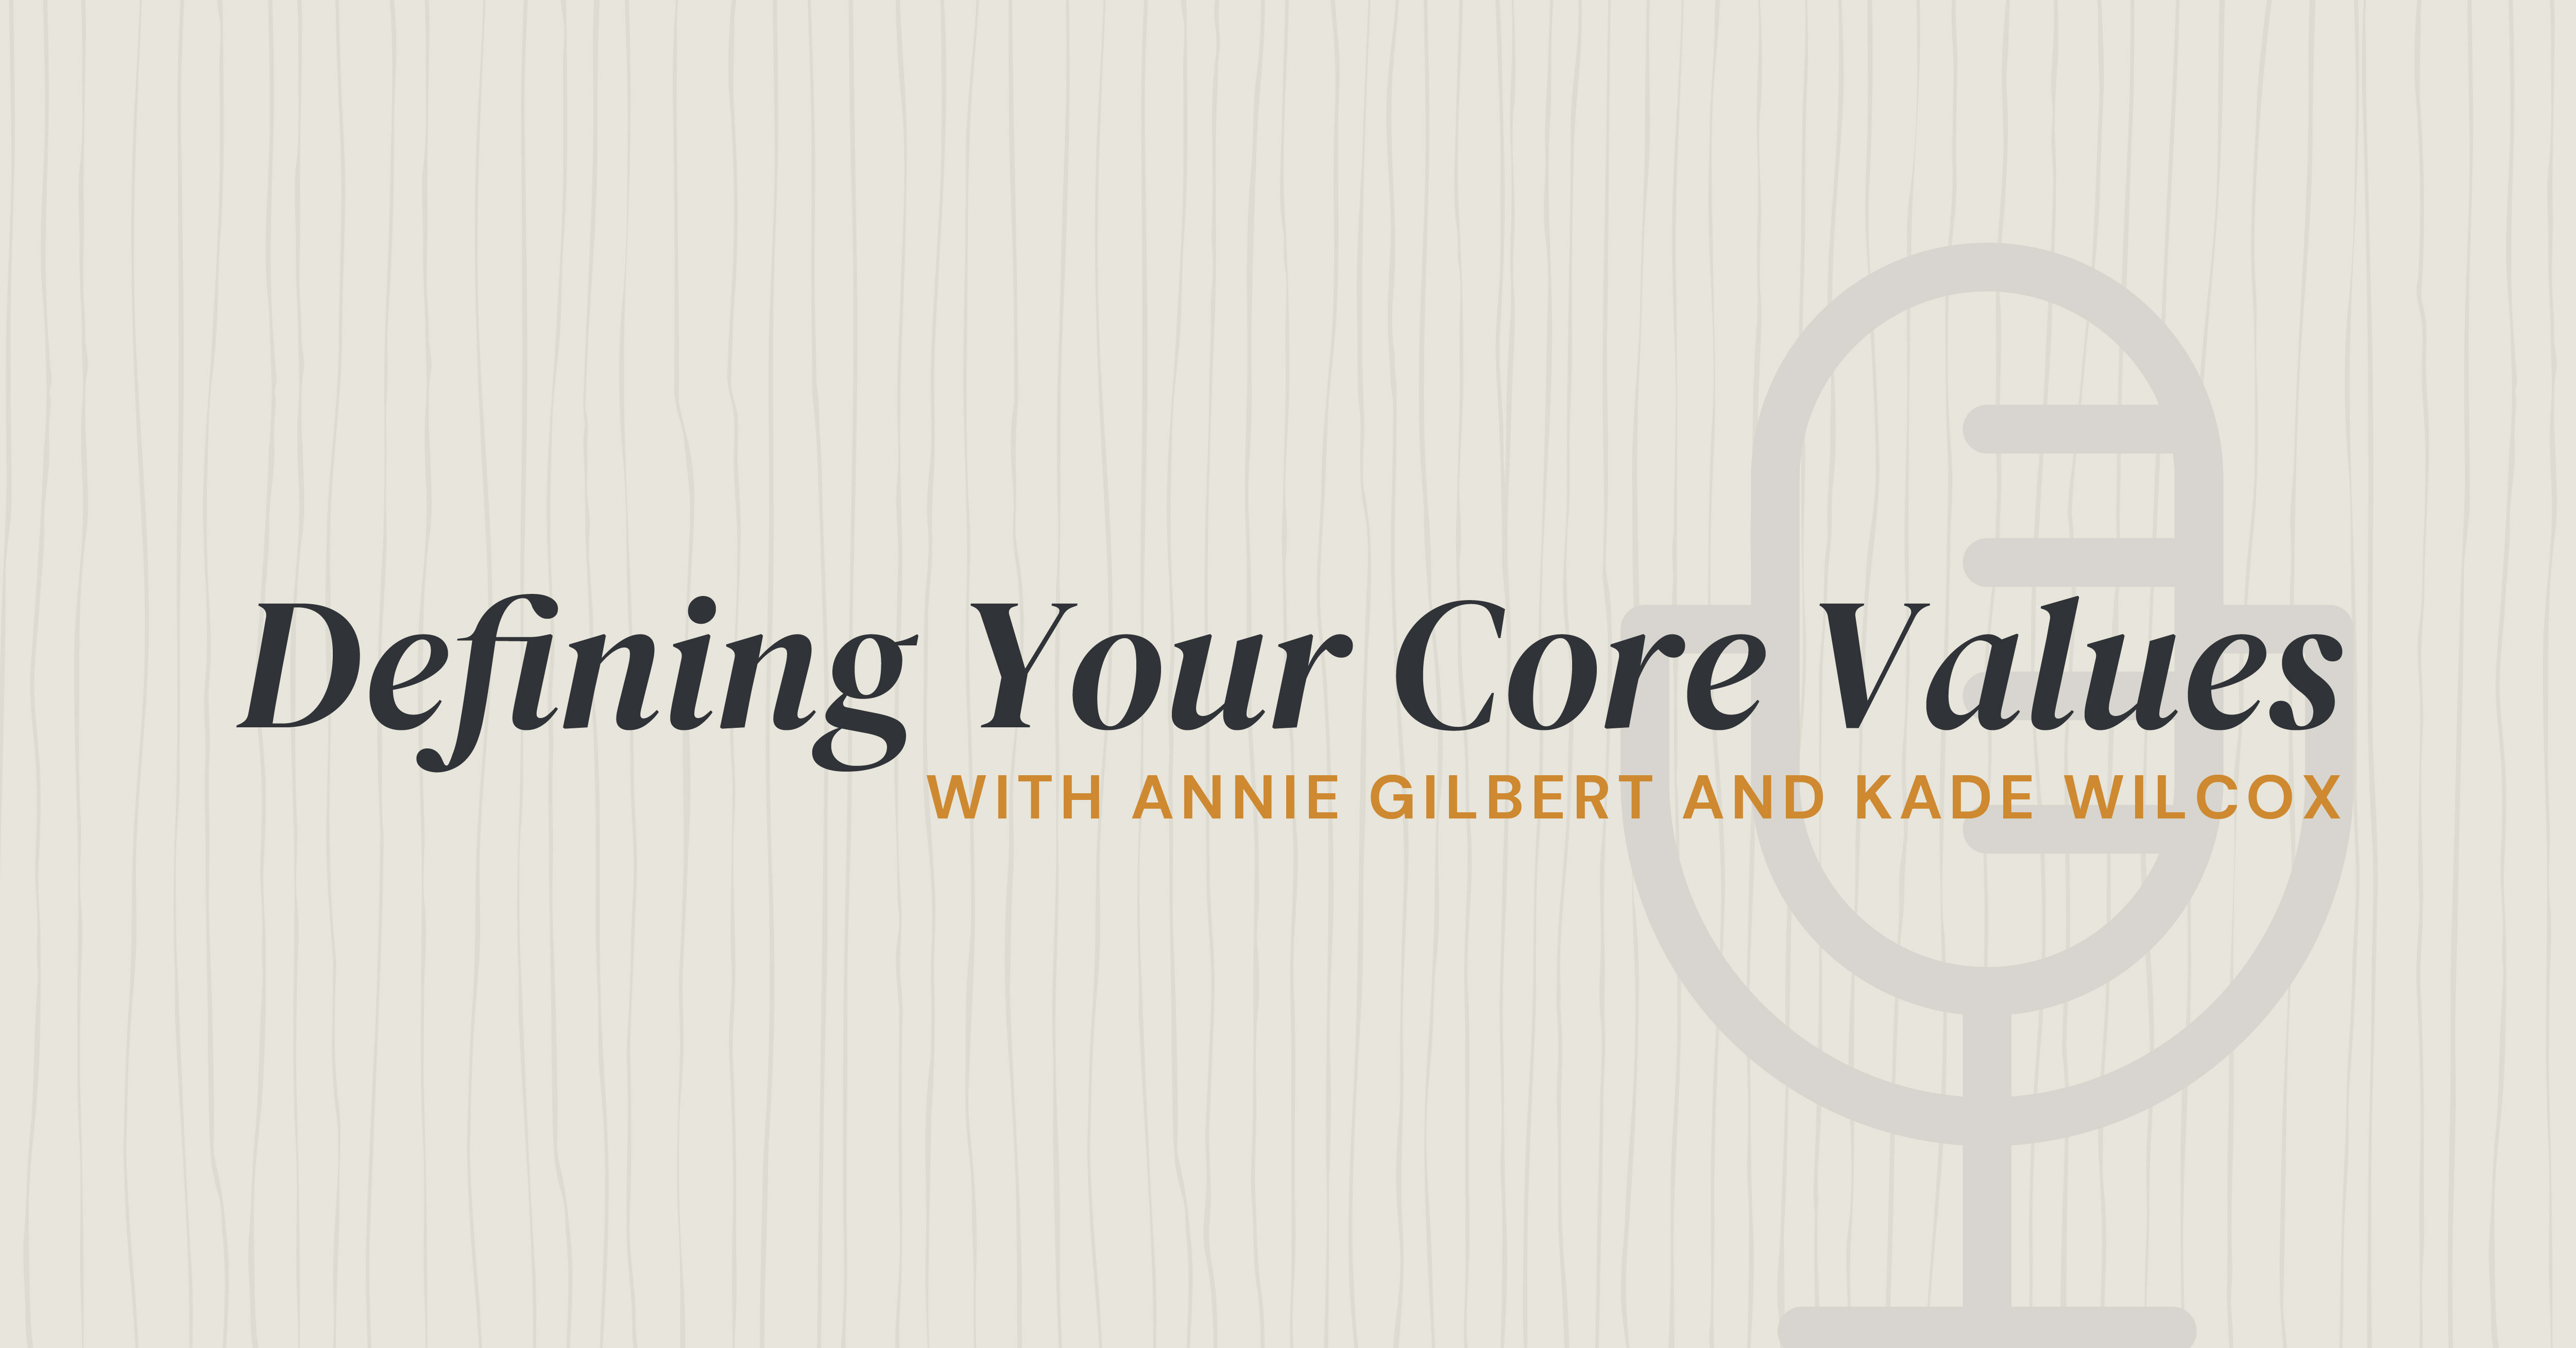 Defining your core values